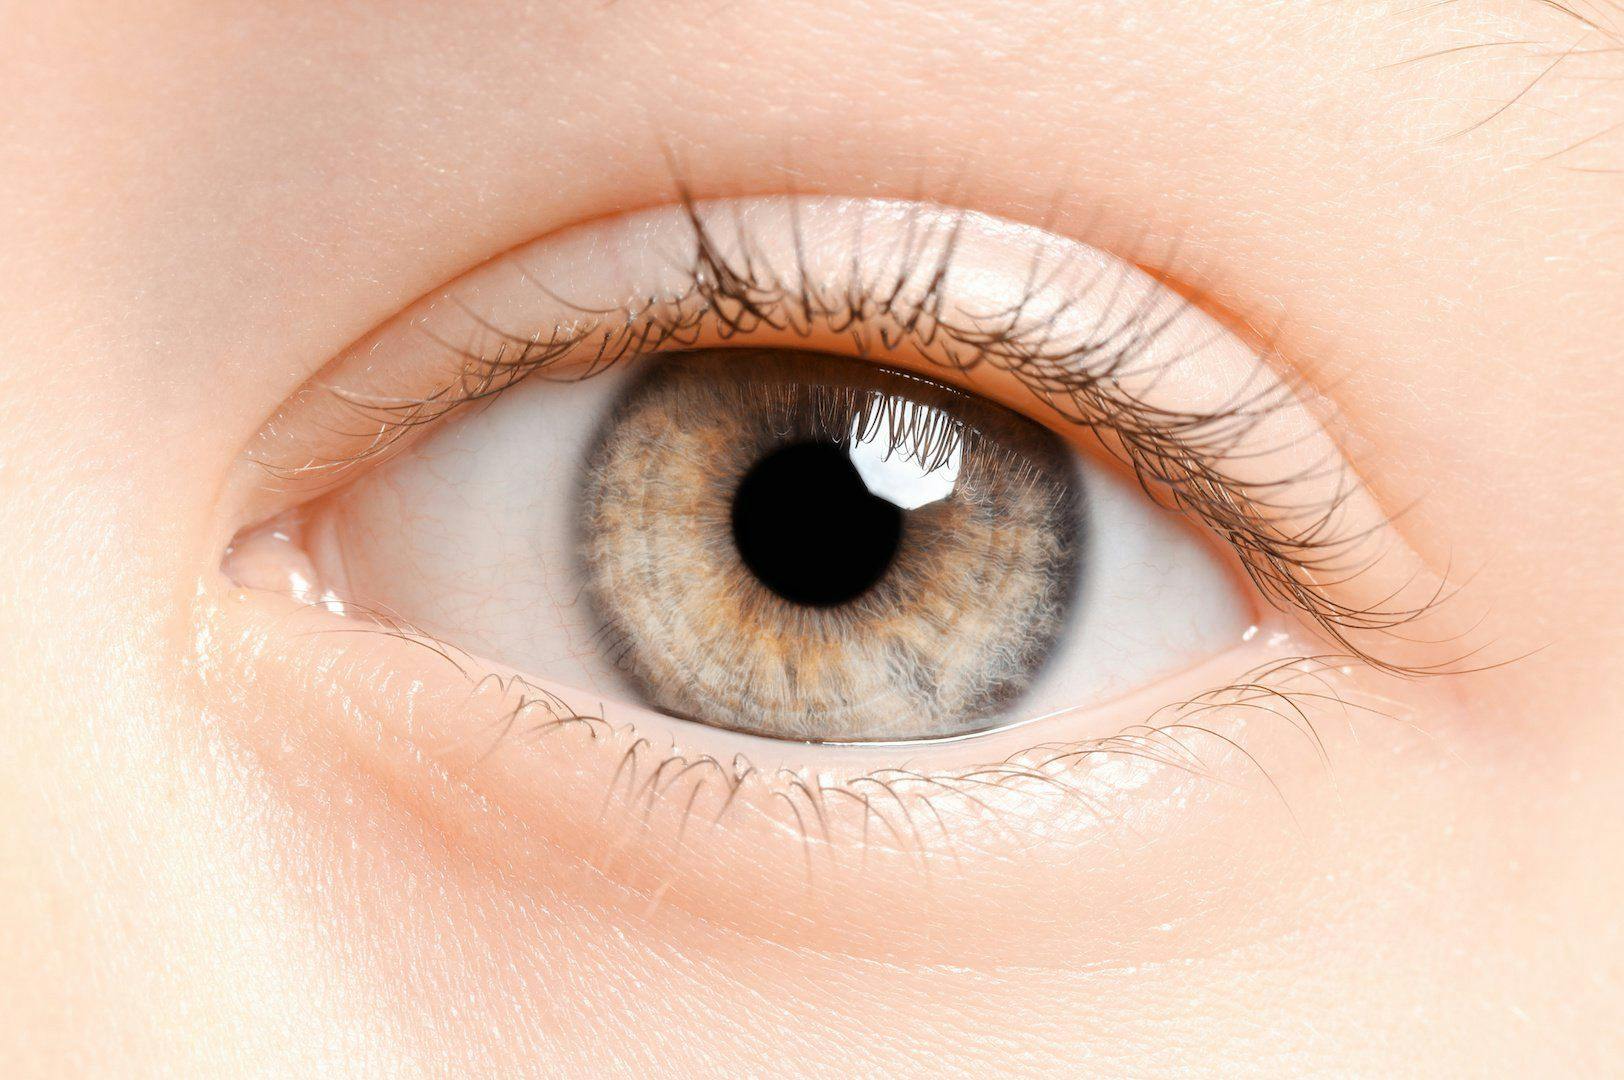 Ocular emergencies: What pediatricians and frontline physicians need to know